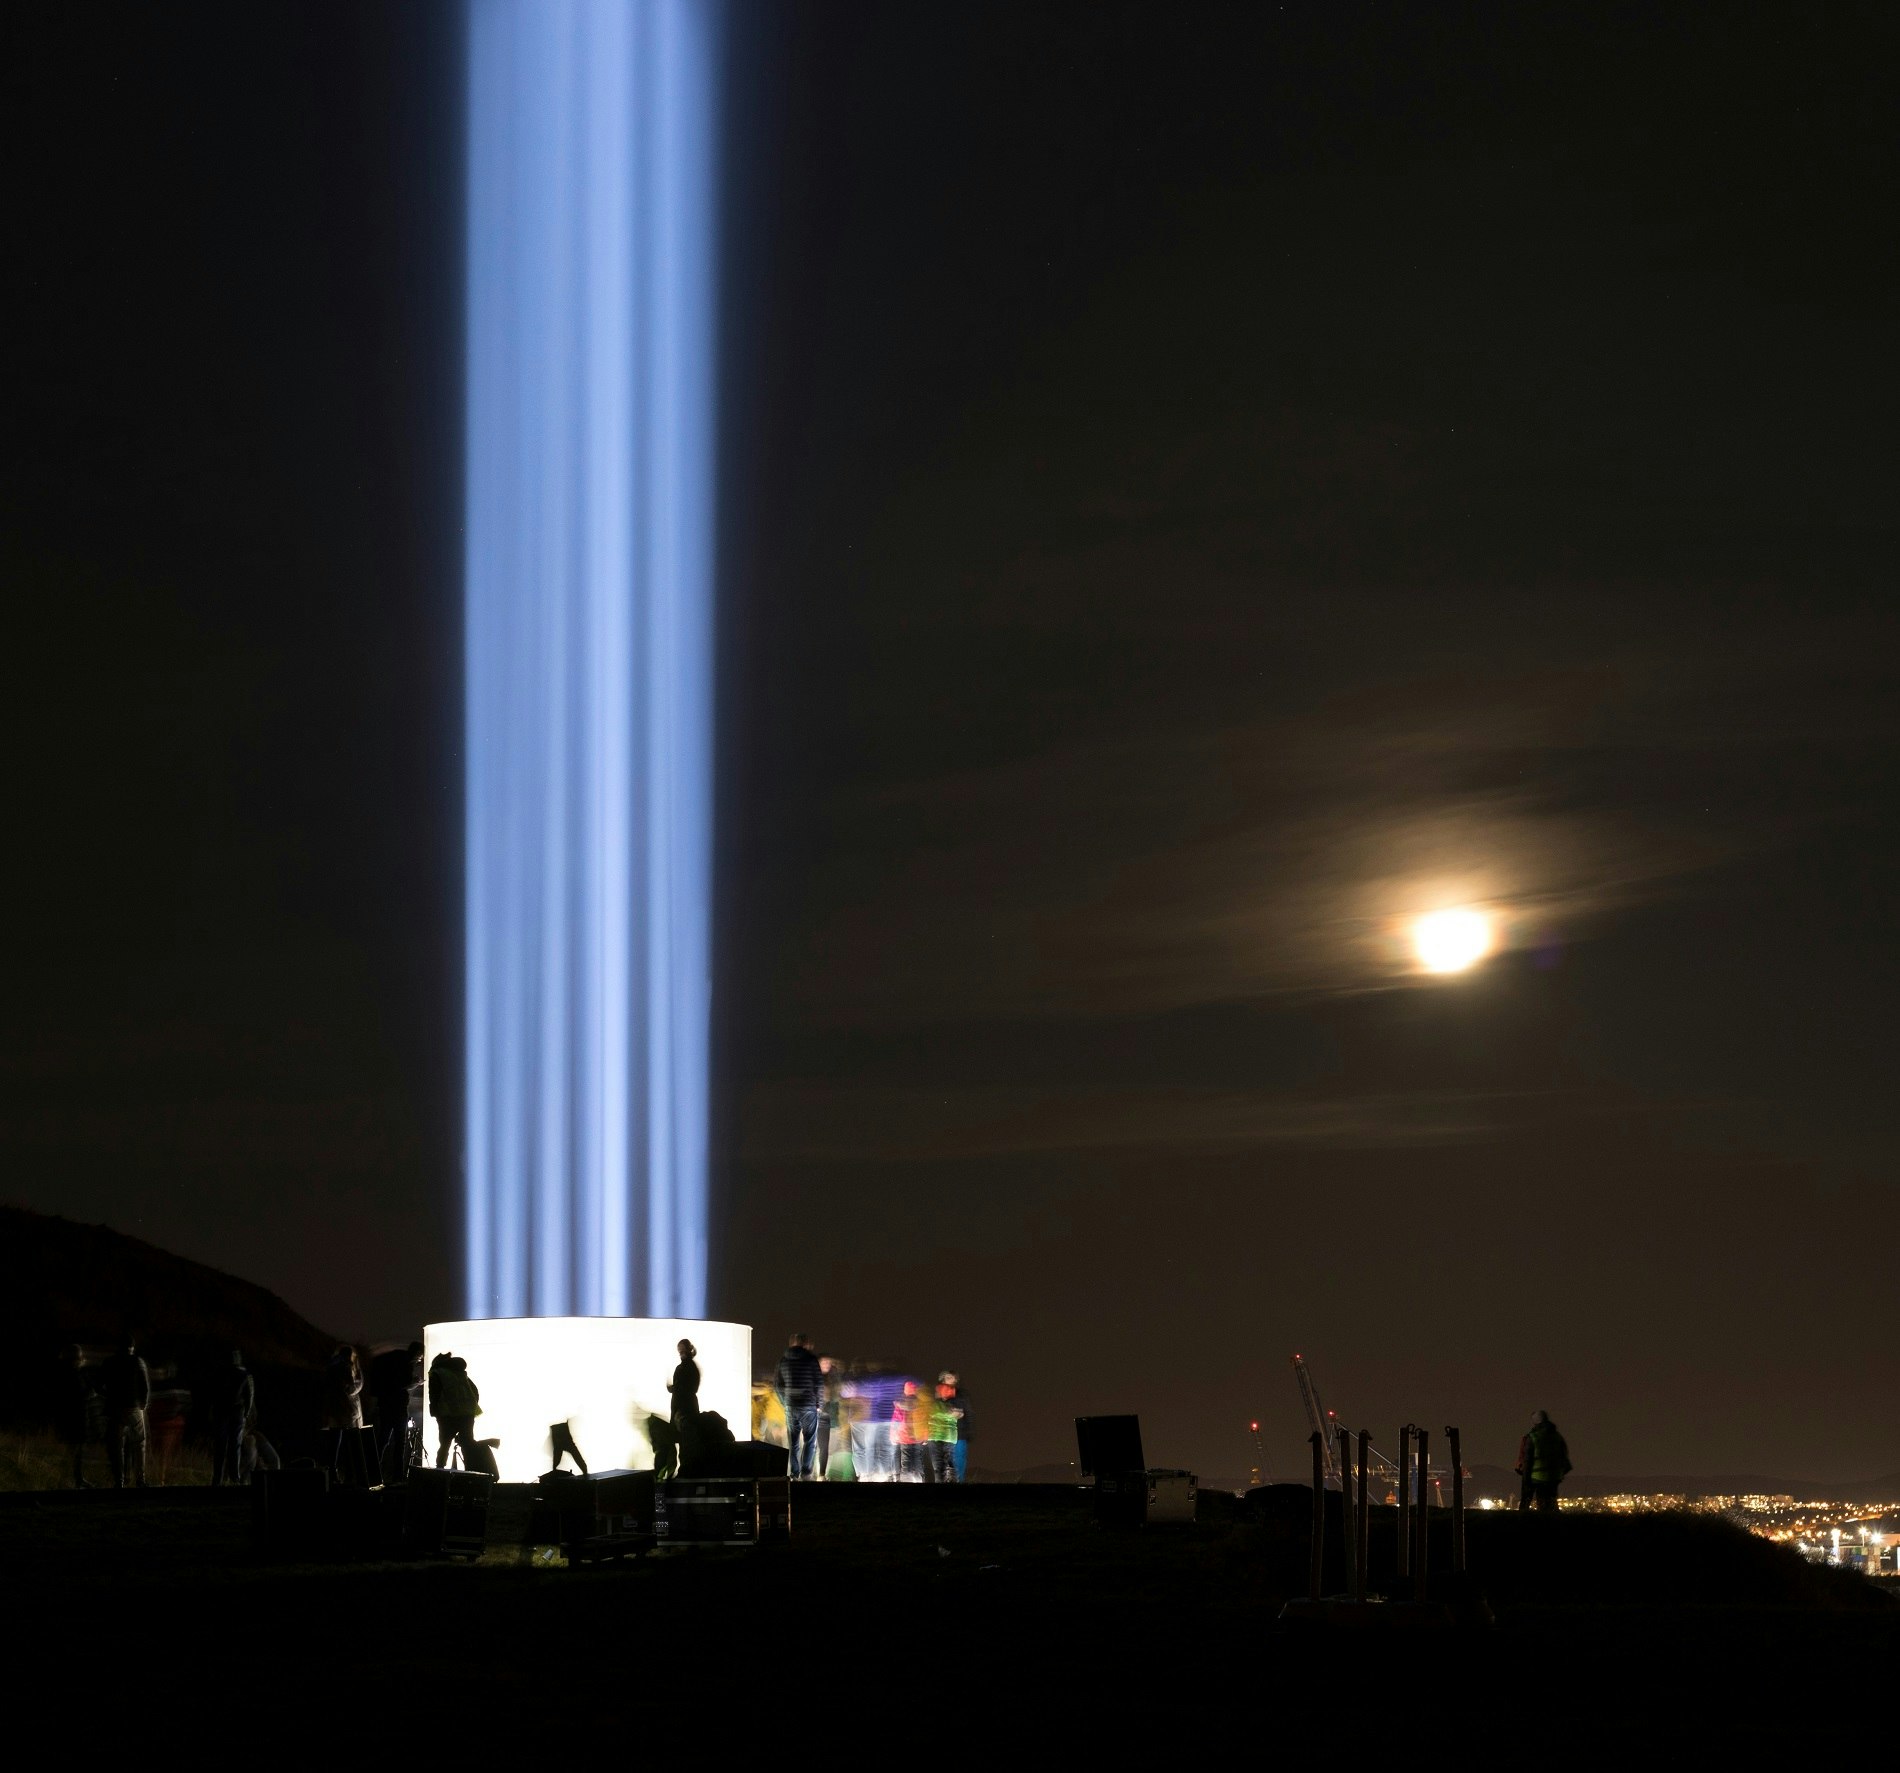 The Imagine Peace Tower in Viðey, Reykjavik with the moon in the background